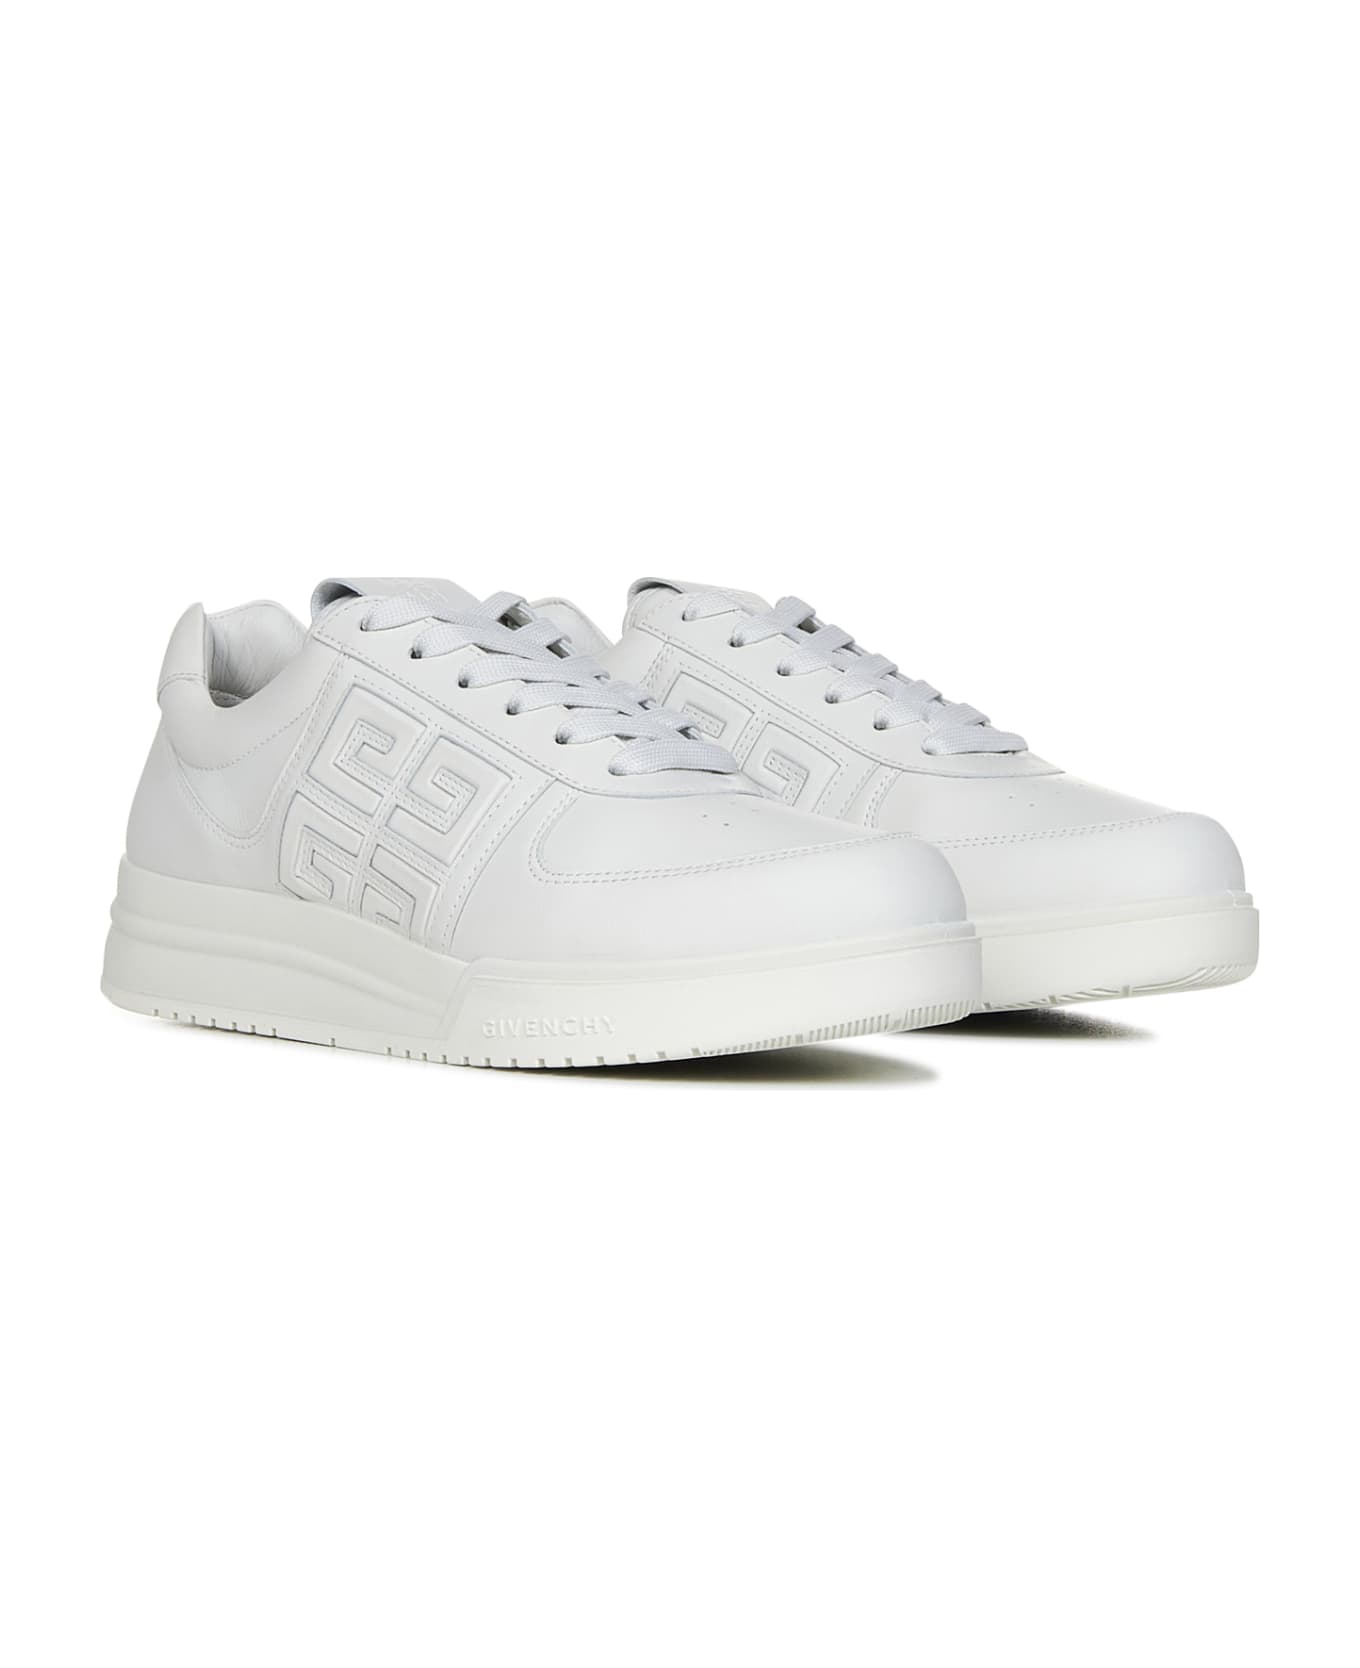 Givenchy 4g Sneakers - White